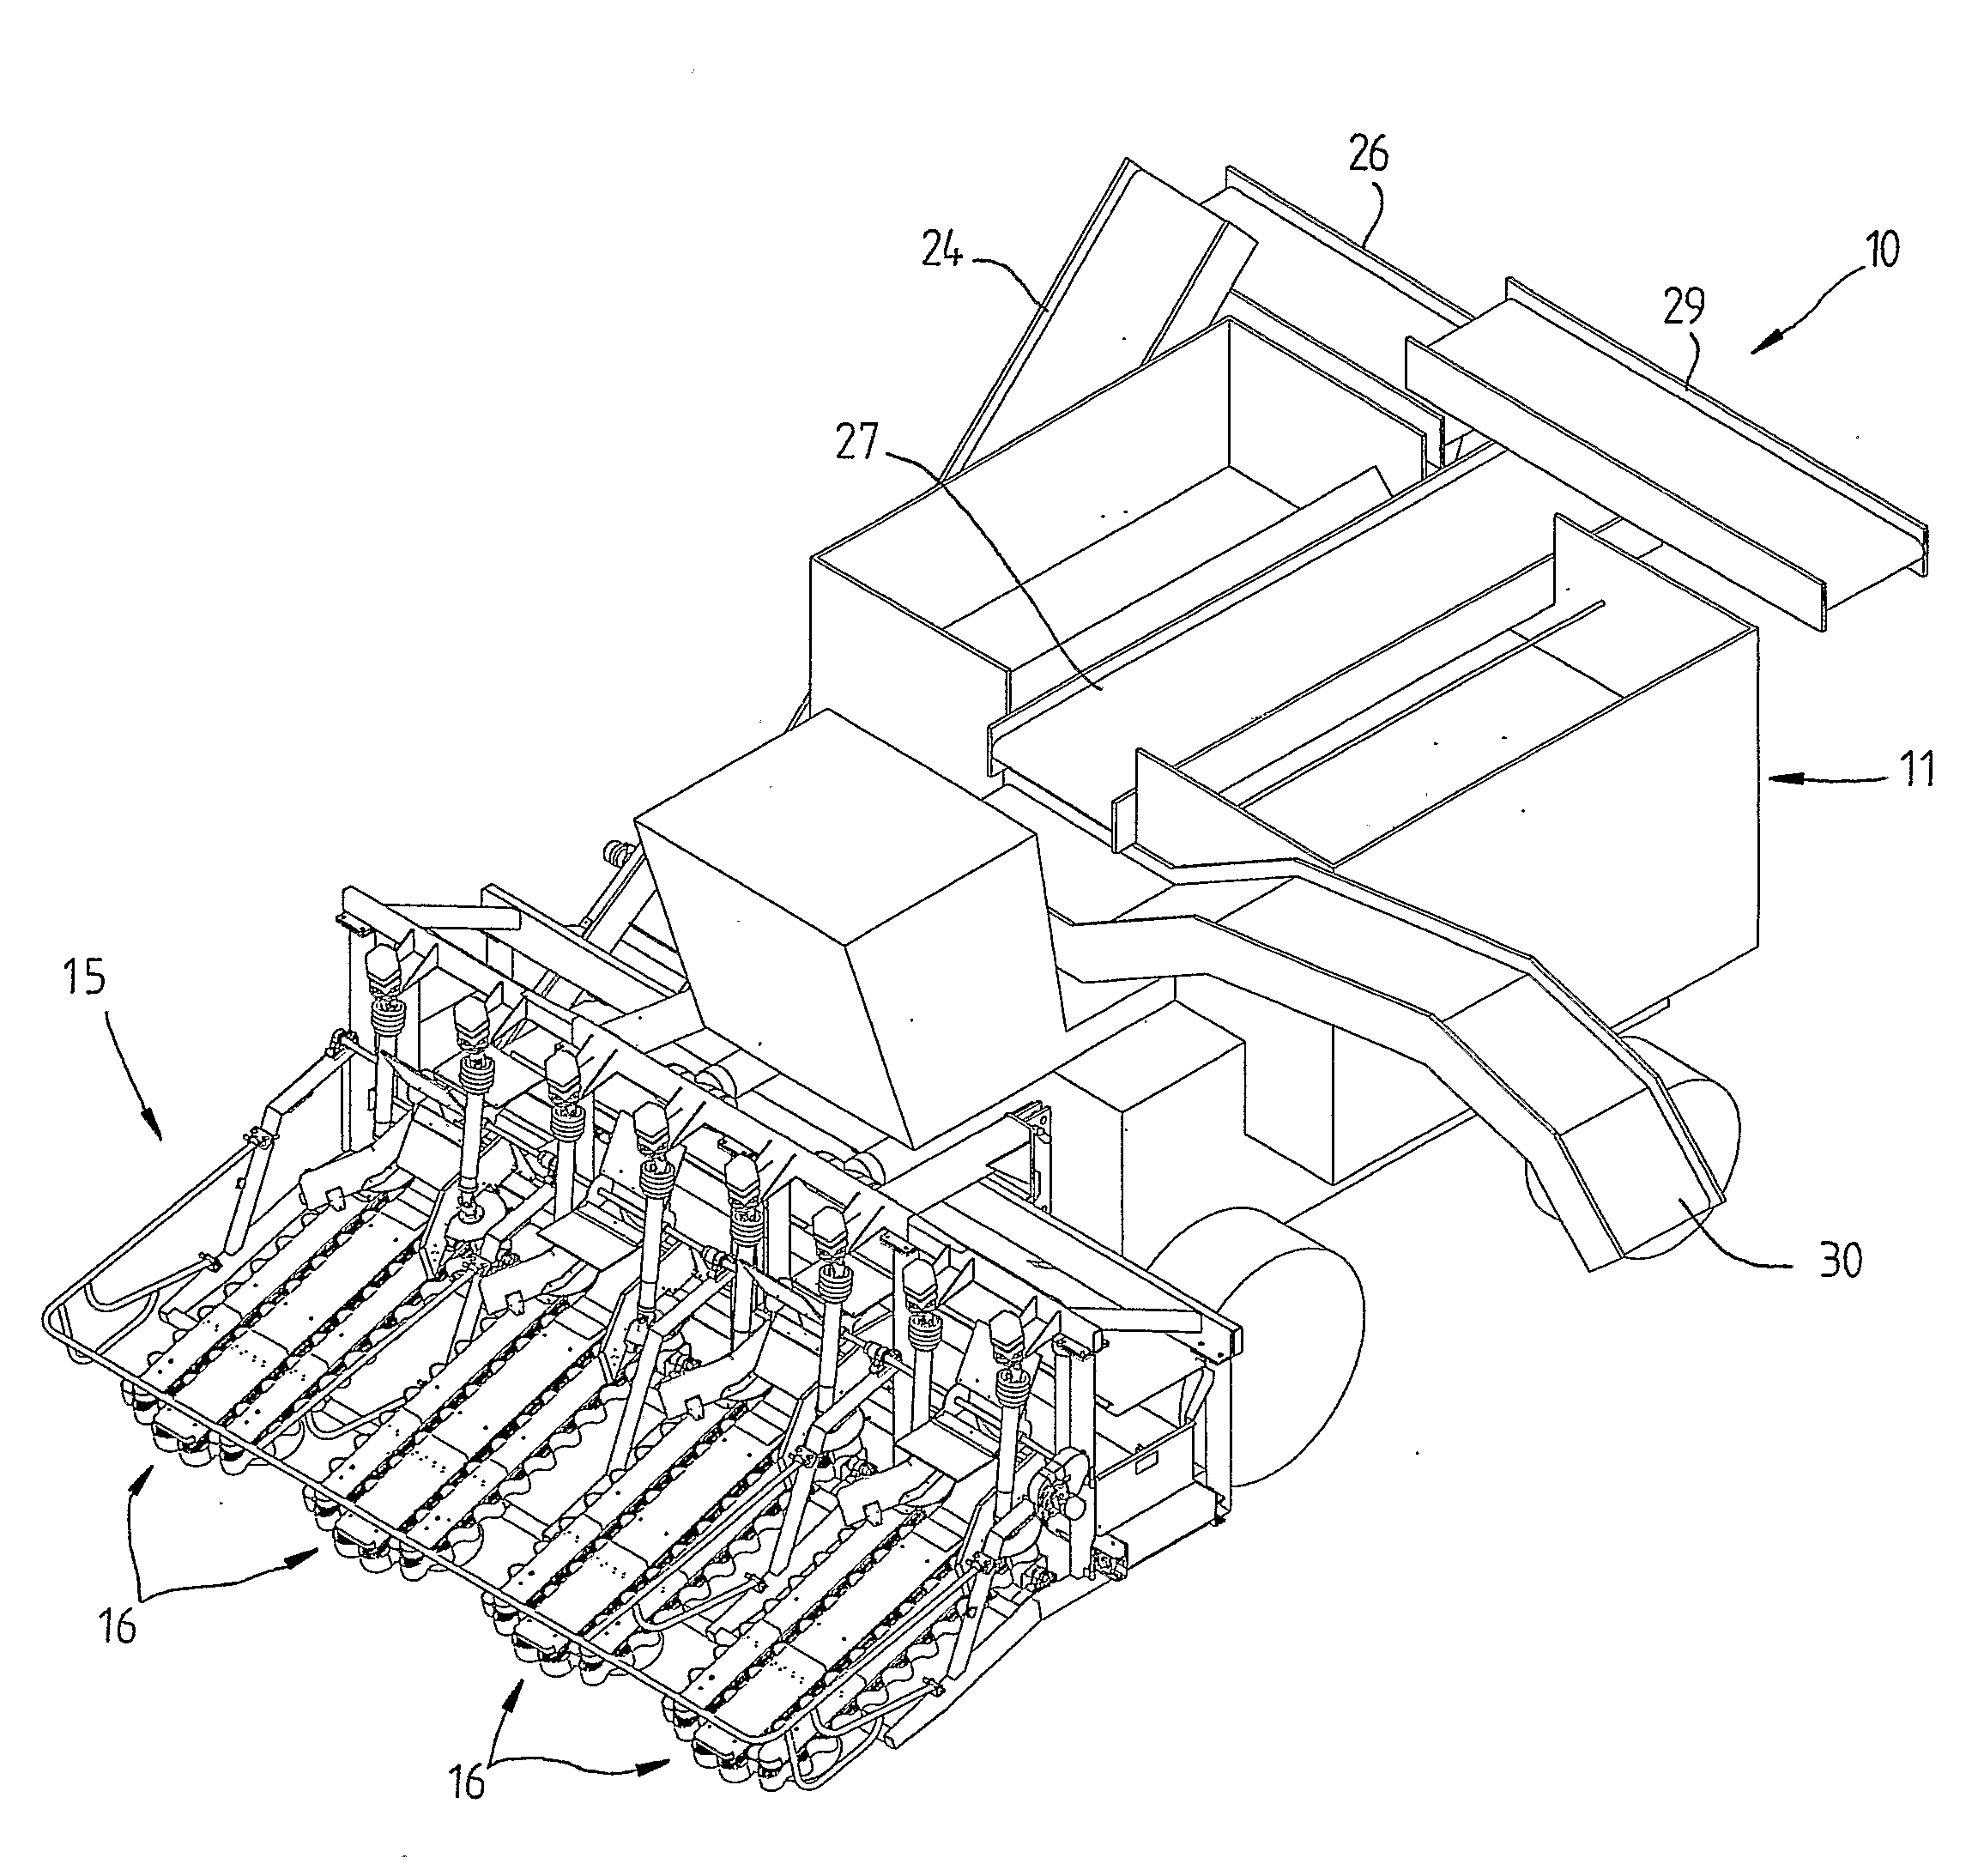 Method and Apparatus for Harvesting Standing Vegetable Crops